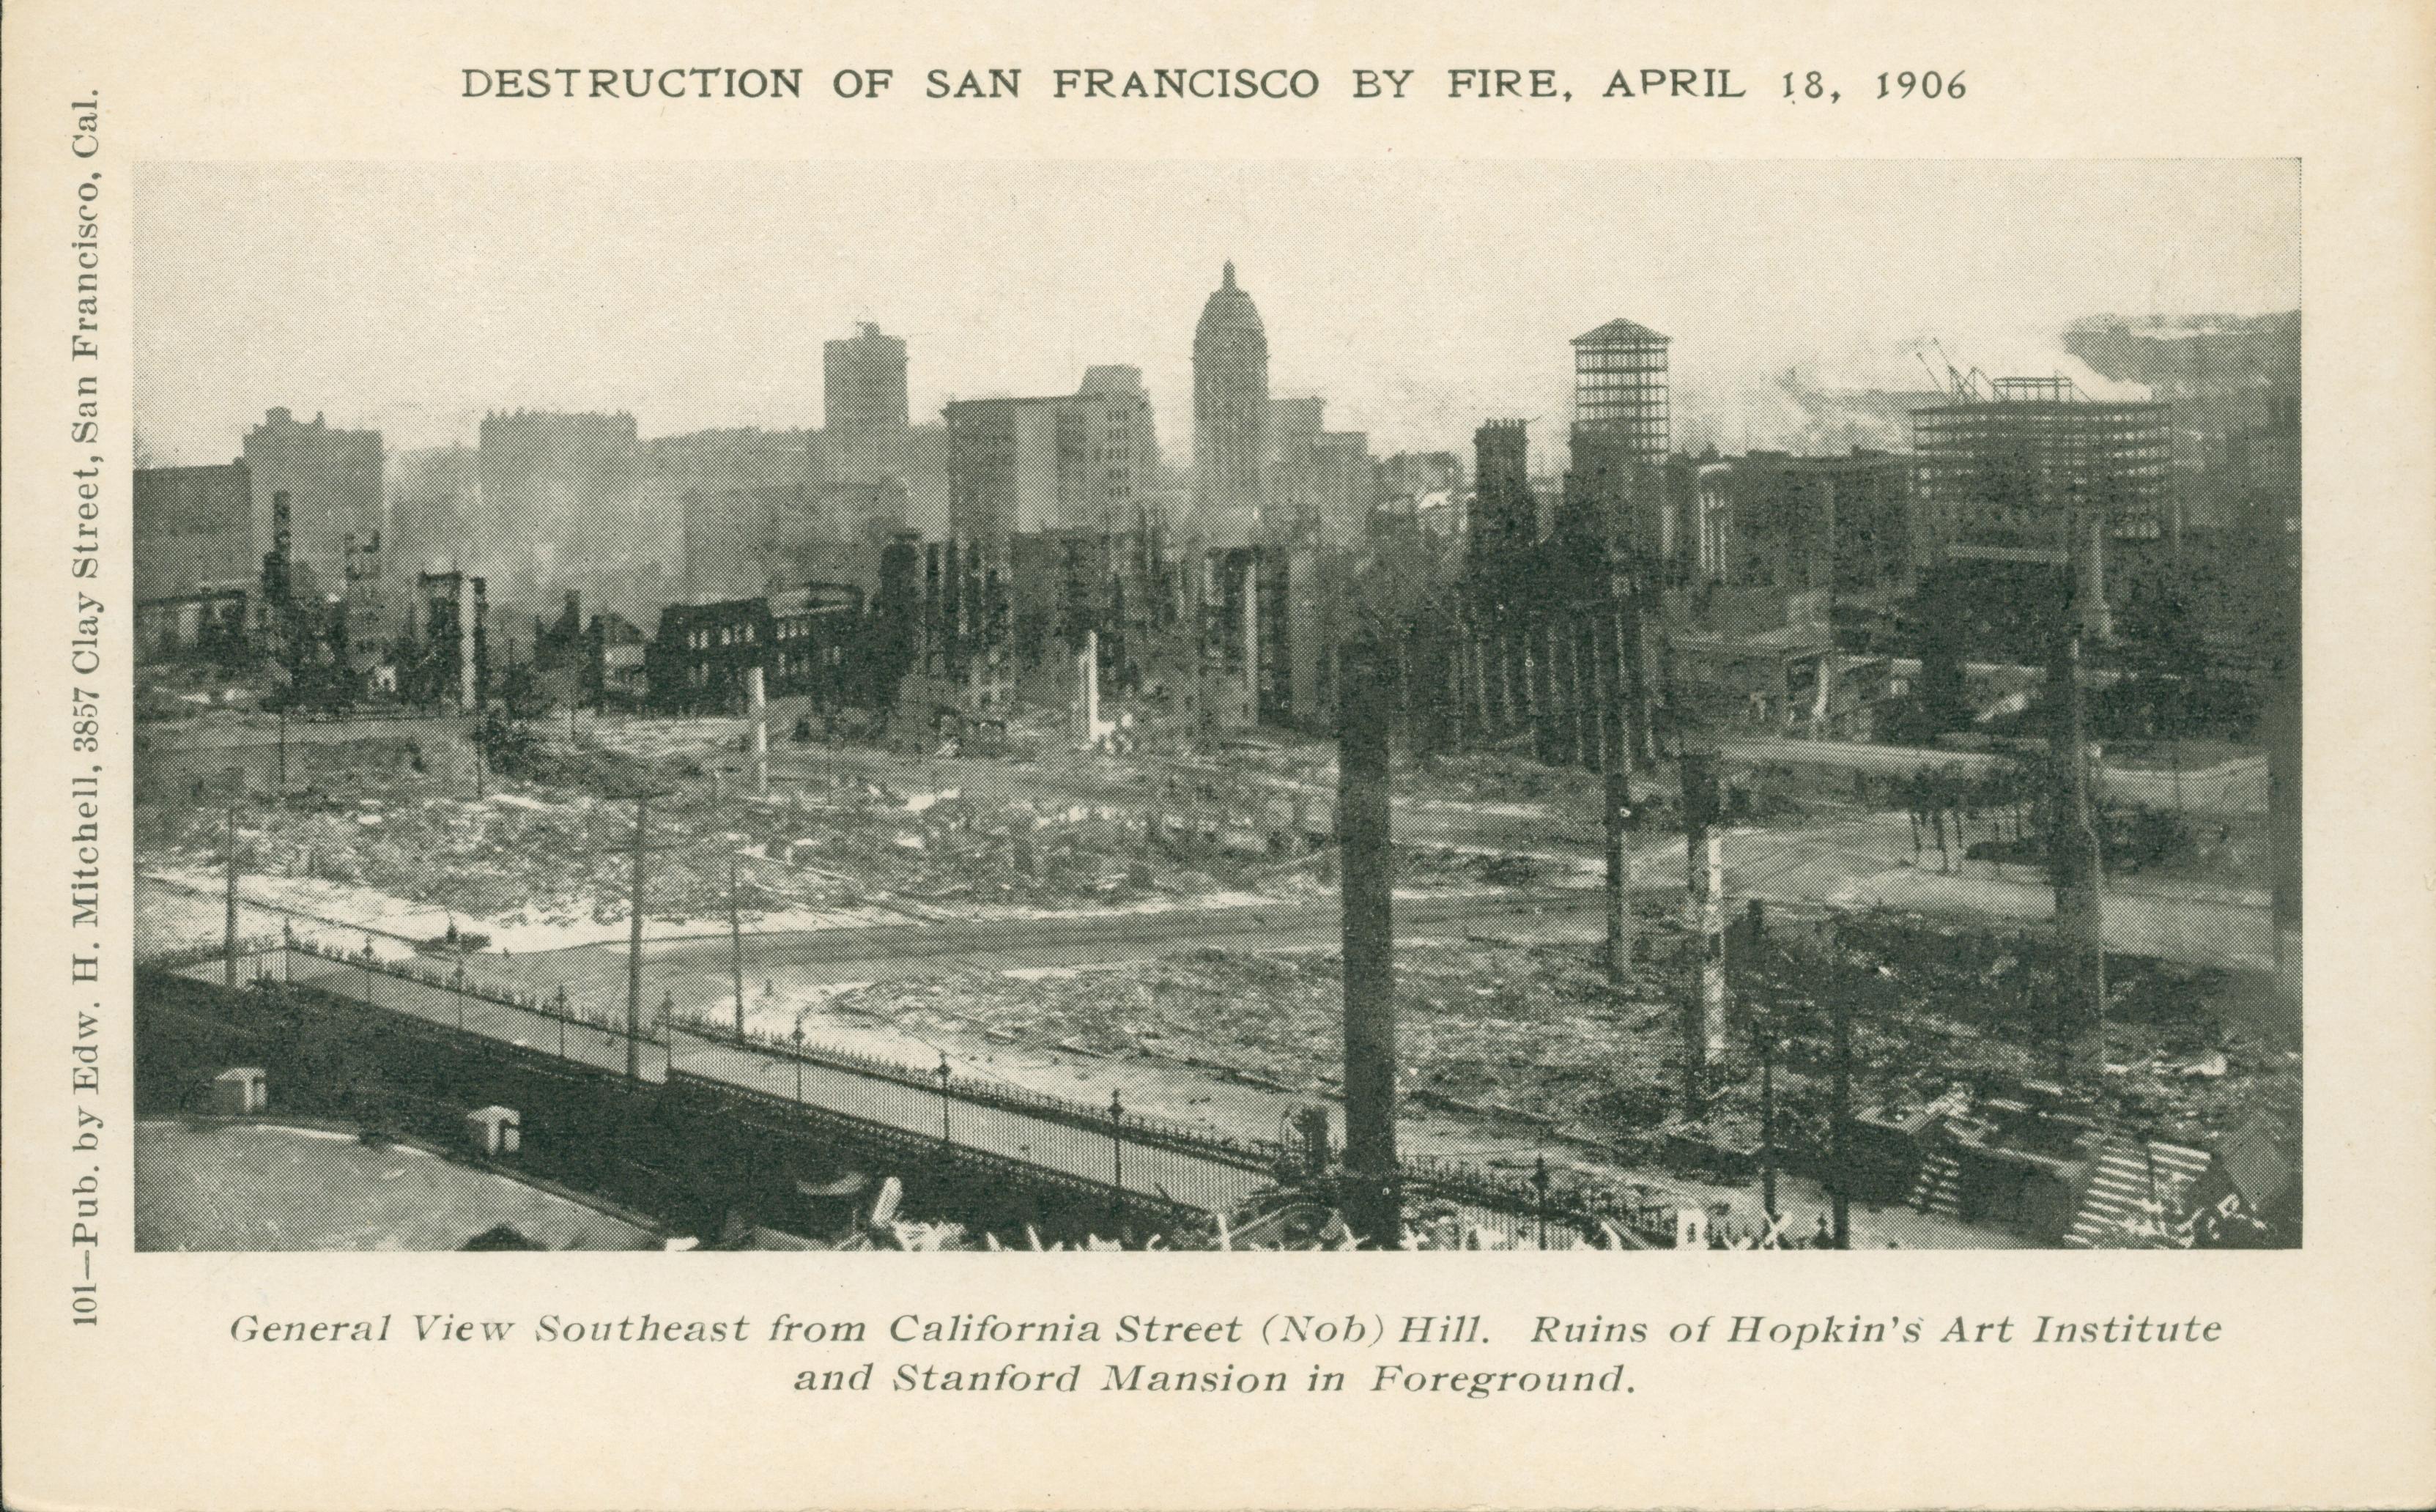 Shows a bird's-eye view from Nob Hill of the destruction of San Francisco, April 18, 1906.